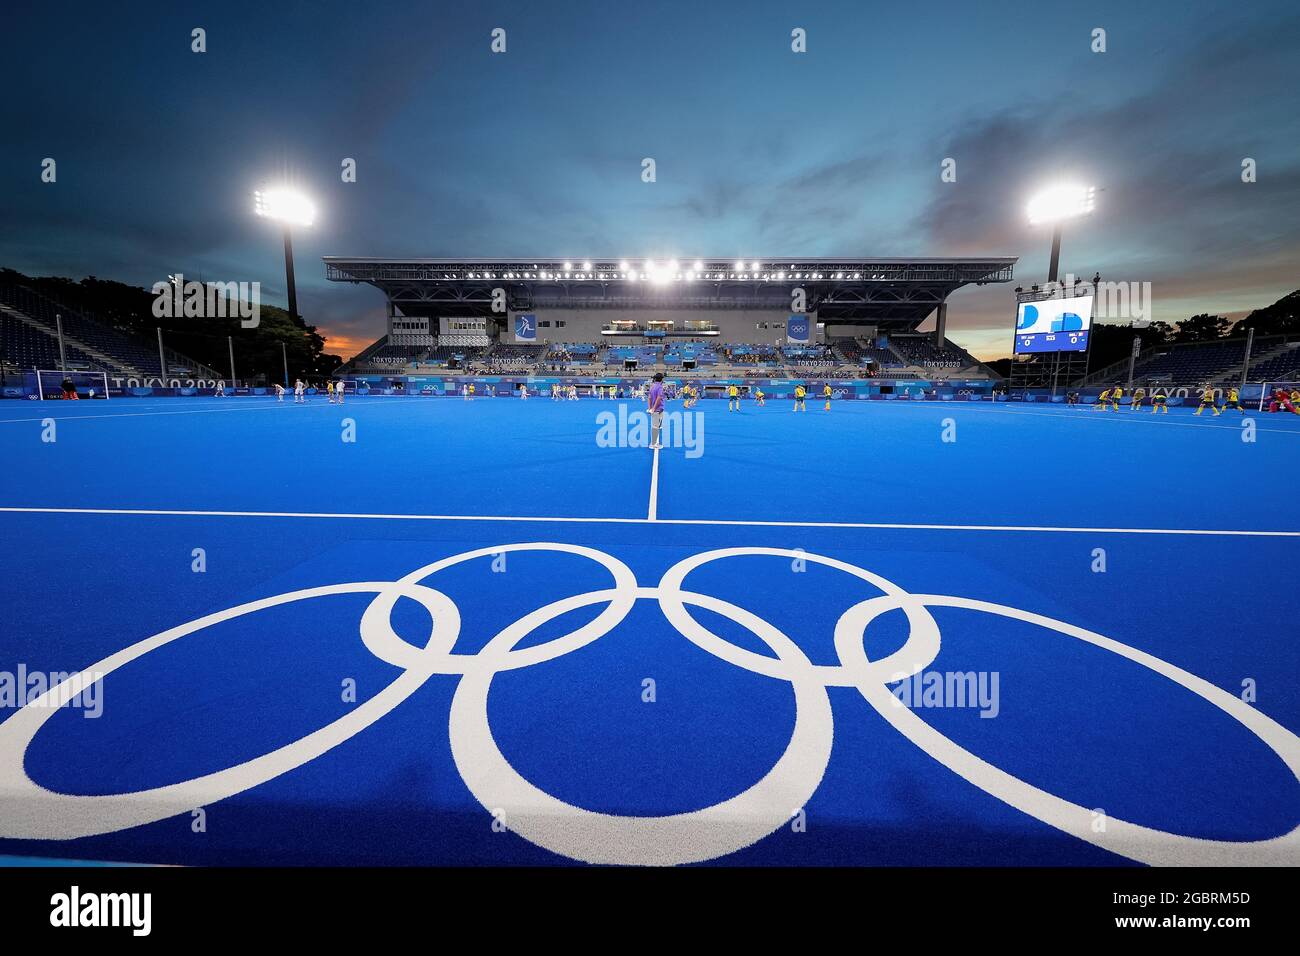 Tokyo, Japan, 5 August, 2021. A view of Oi Hockey Stadium during the Men's Hockey Gold Medal match between Australia and Belgium on Day 13 of the Tokyo 2020 Olympic Games. Credit: Pete Dovgan/Speed Media/Alamy Live News Stock Photo